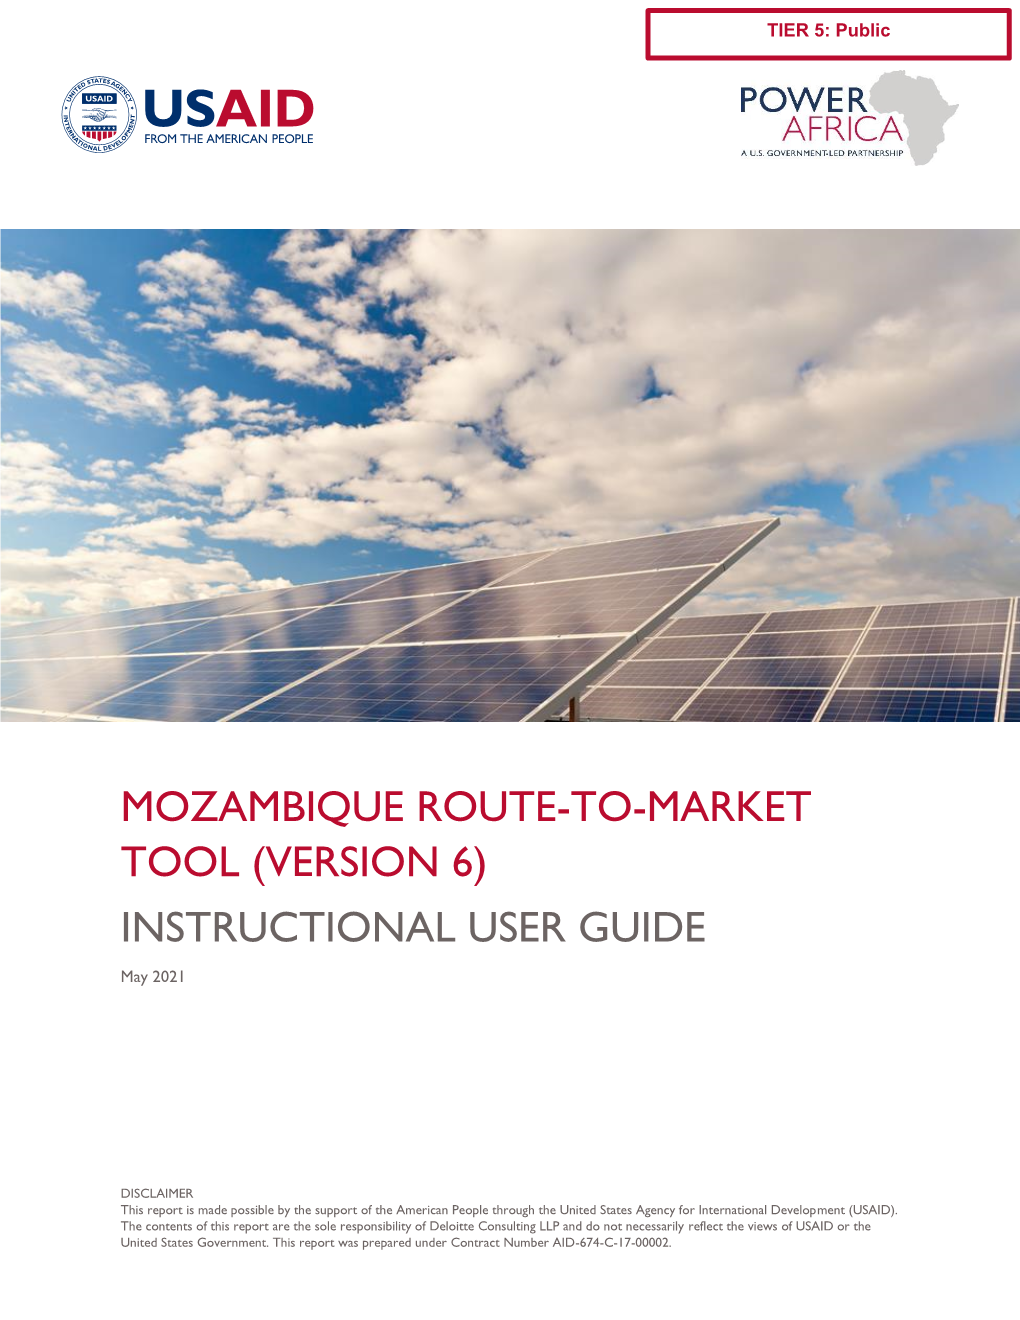 MOZAMBIQUE RTM TOOL INSTRUCTIONAL USER GUIDE | I 1 PURPOSE and OVERVIEW USAID Introduction Video – an Introduction to the RTM Tool and the USAID SAEP Project